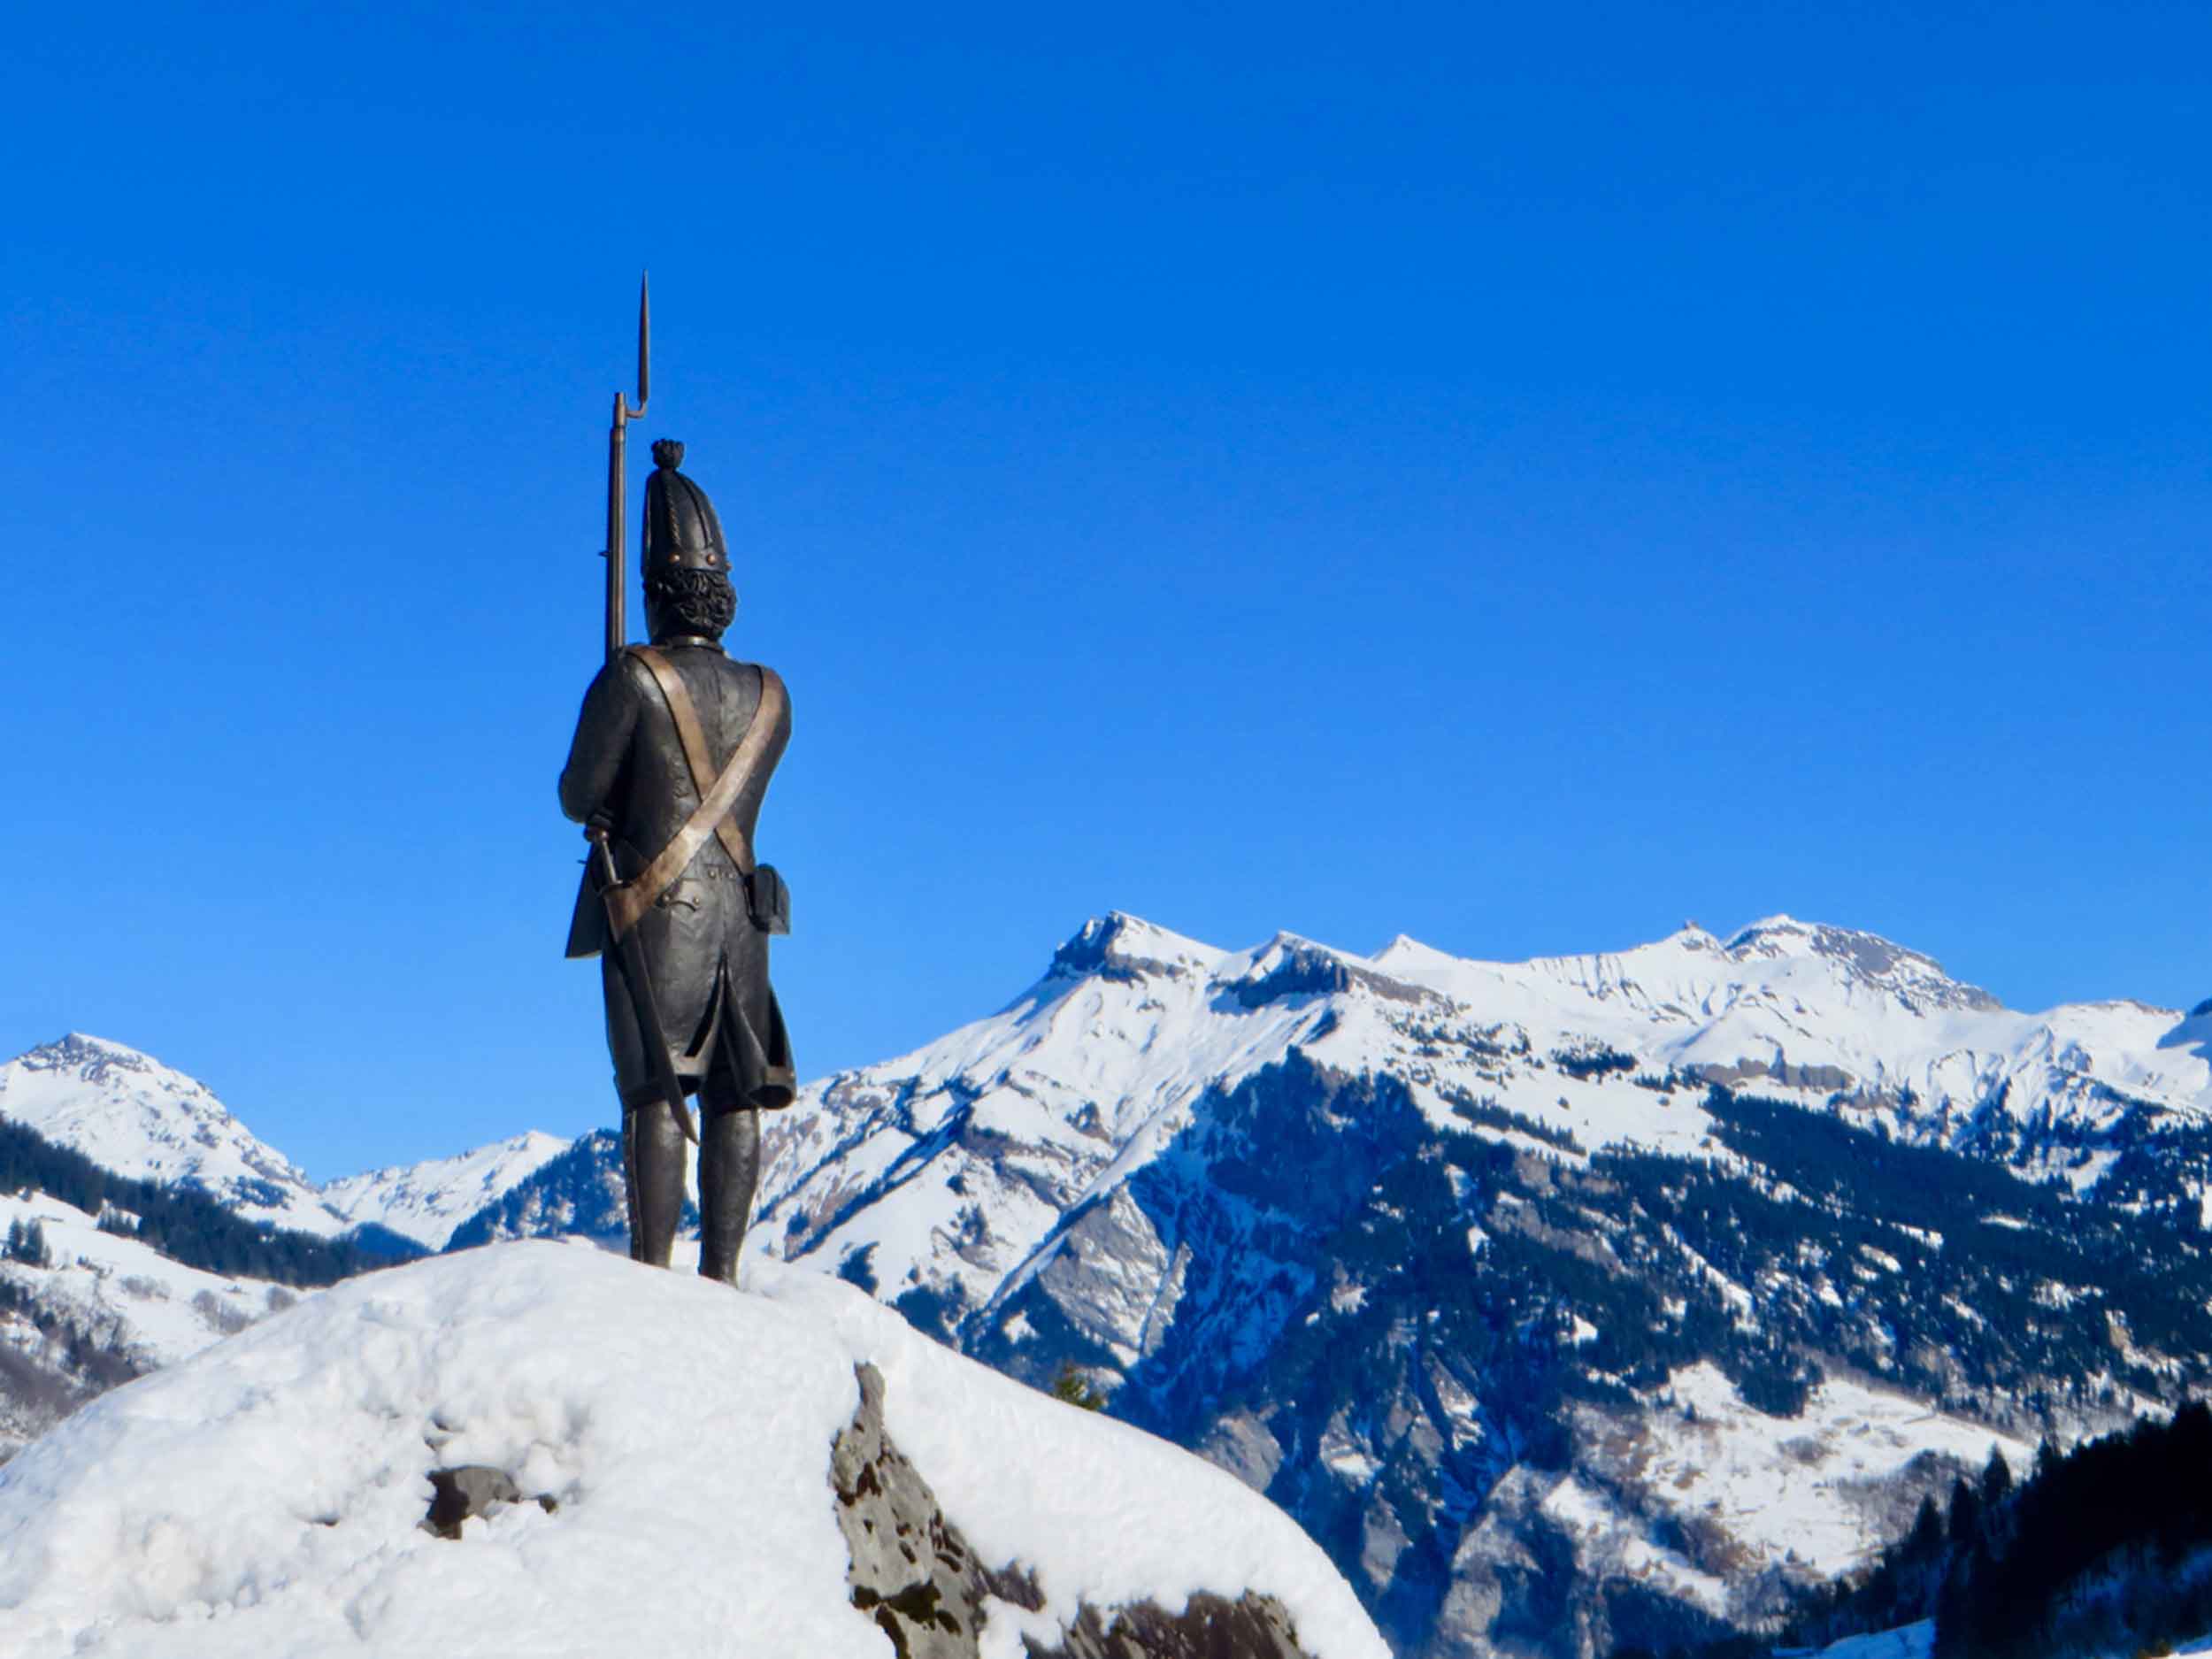 On the Trail of General Alexander Suvorov in Switzerland by Erwin Tours of Switzerland-Customized Private Tour Switzerland-Photo © Erwin Faessler Photography